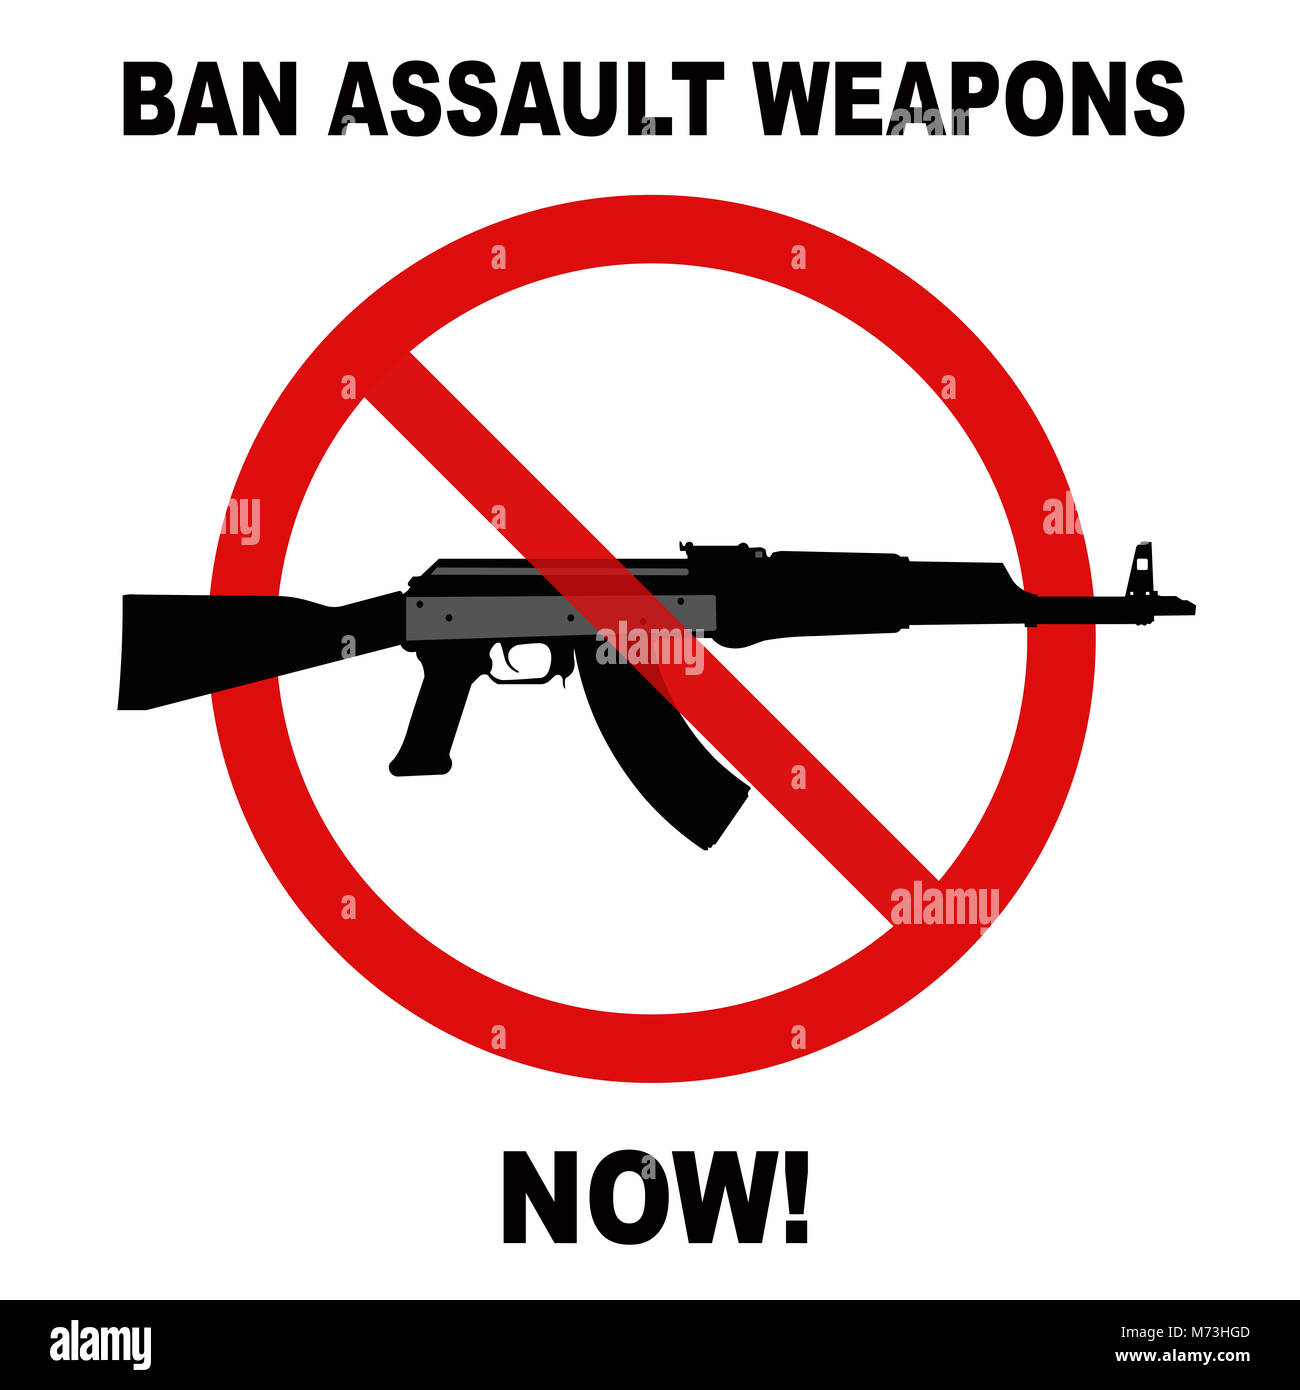 Ban assault weapons now red forbidden sign against white background Stock Photo